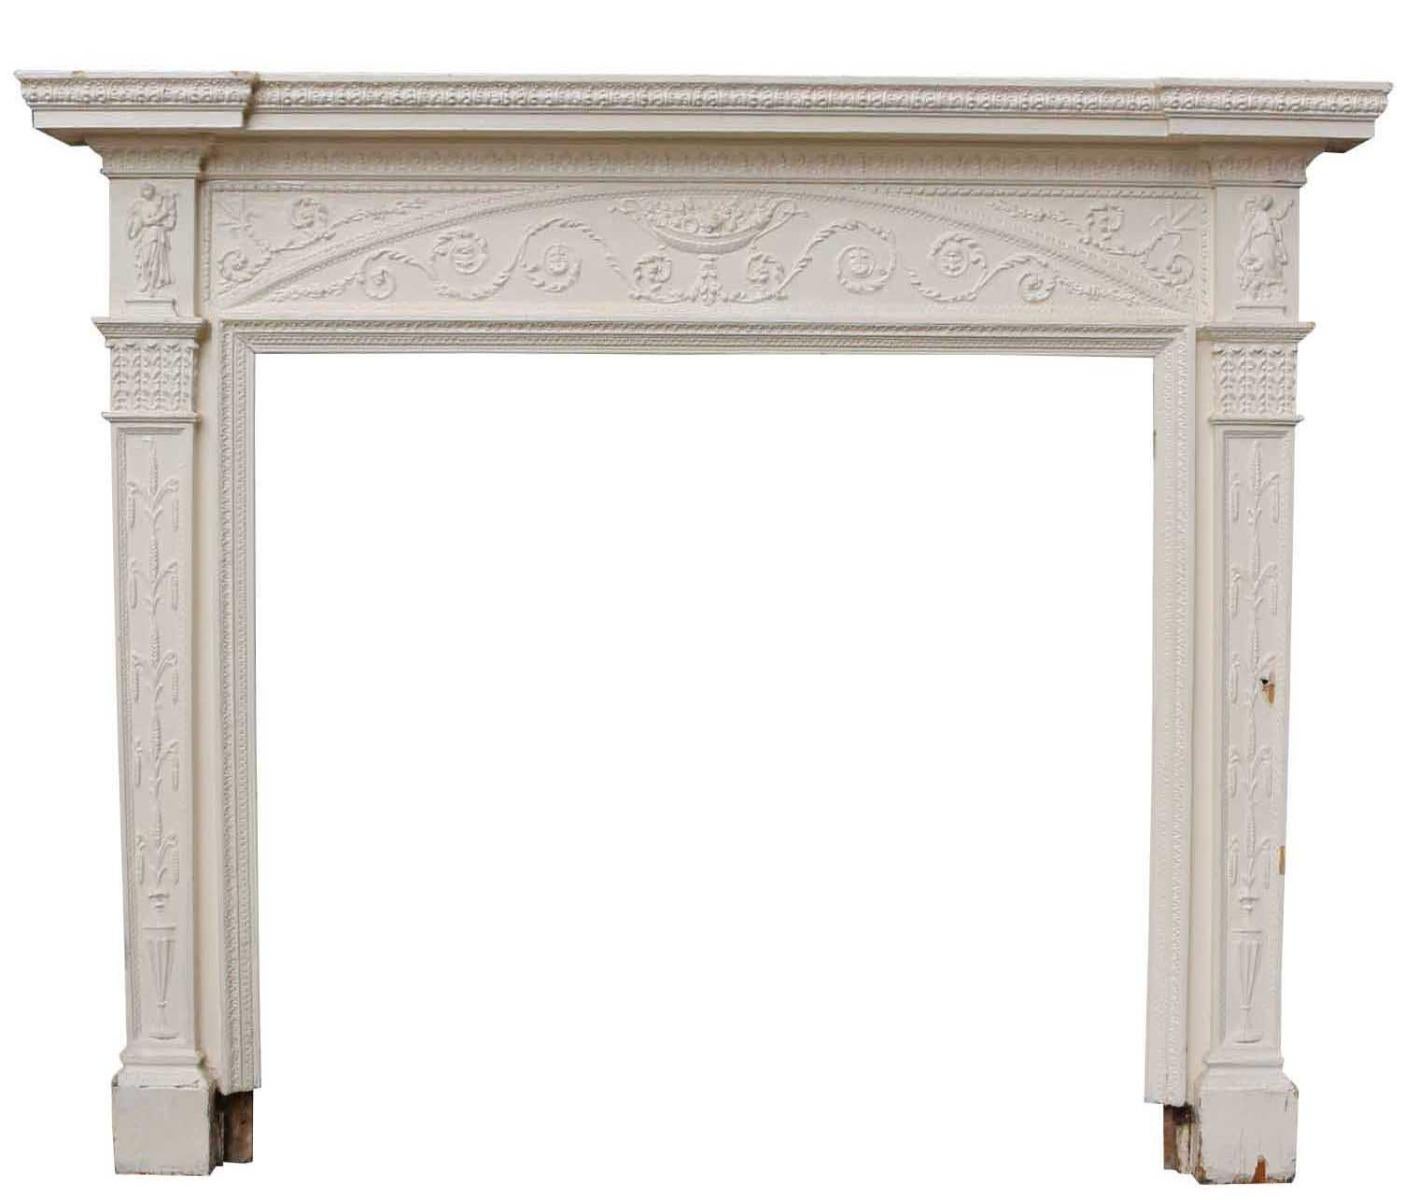 An English painted pine and composition (Gesso) fire surround in the Adam style. Salvaged from a house in York.

Additional Dimensions
Opening Height 112 cm

Opening Width 121 cm

Width between outside of legs 161.5 cm.